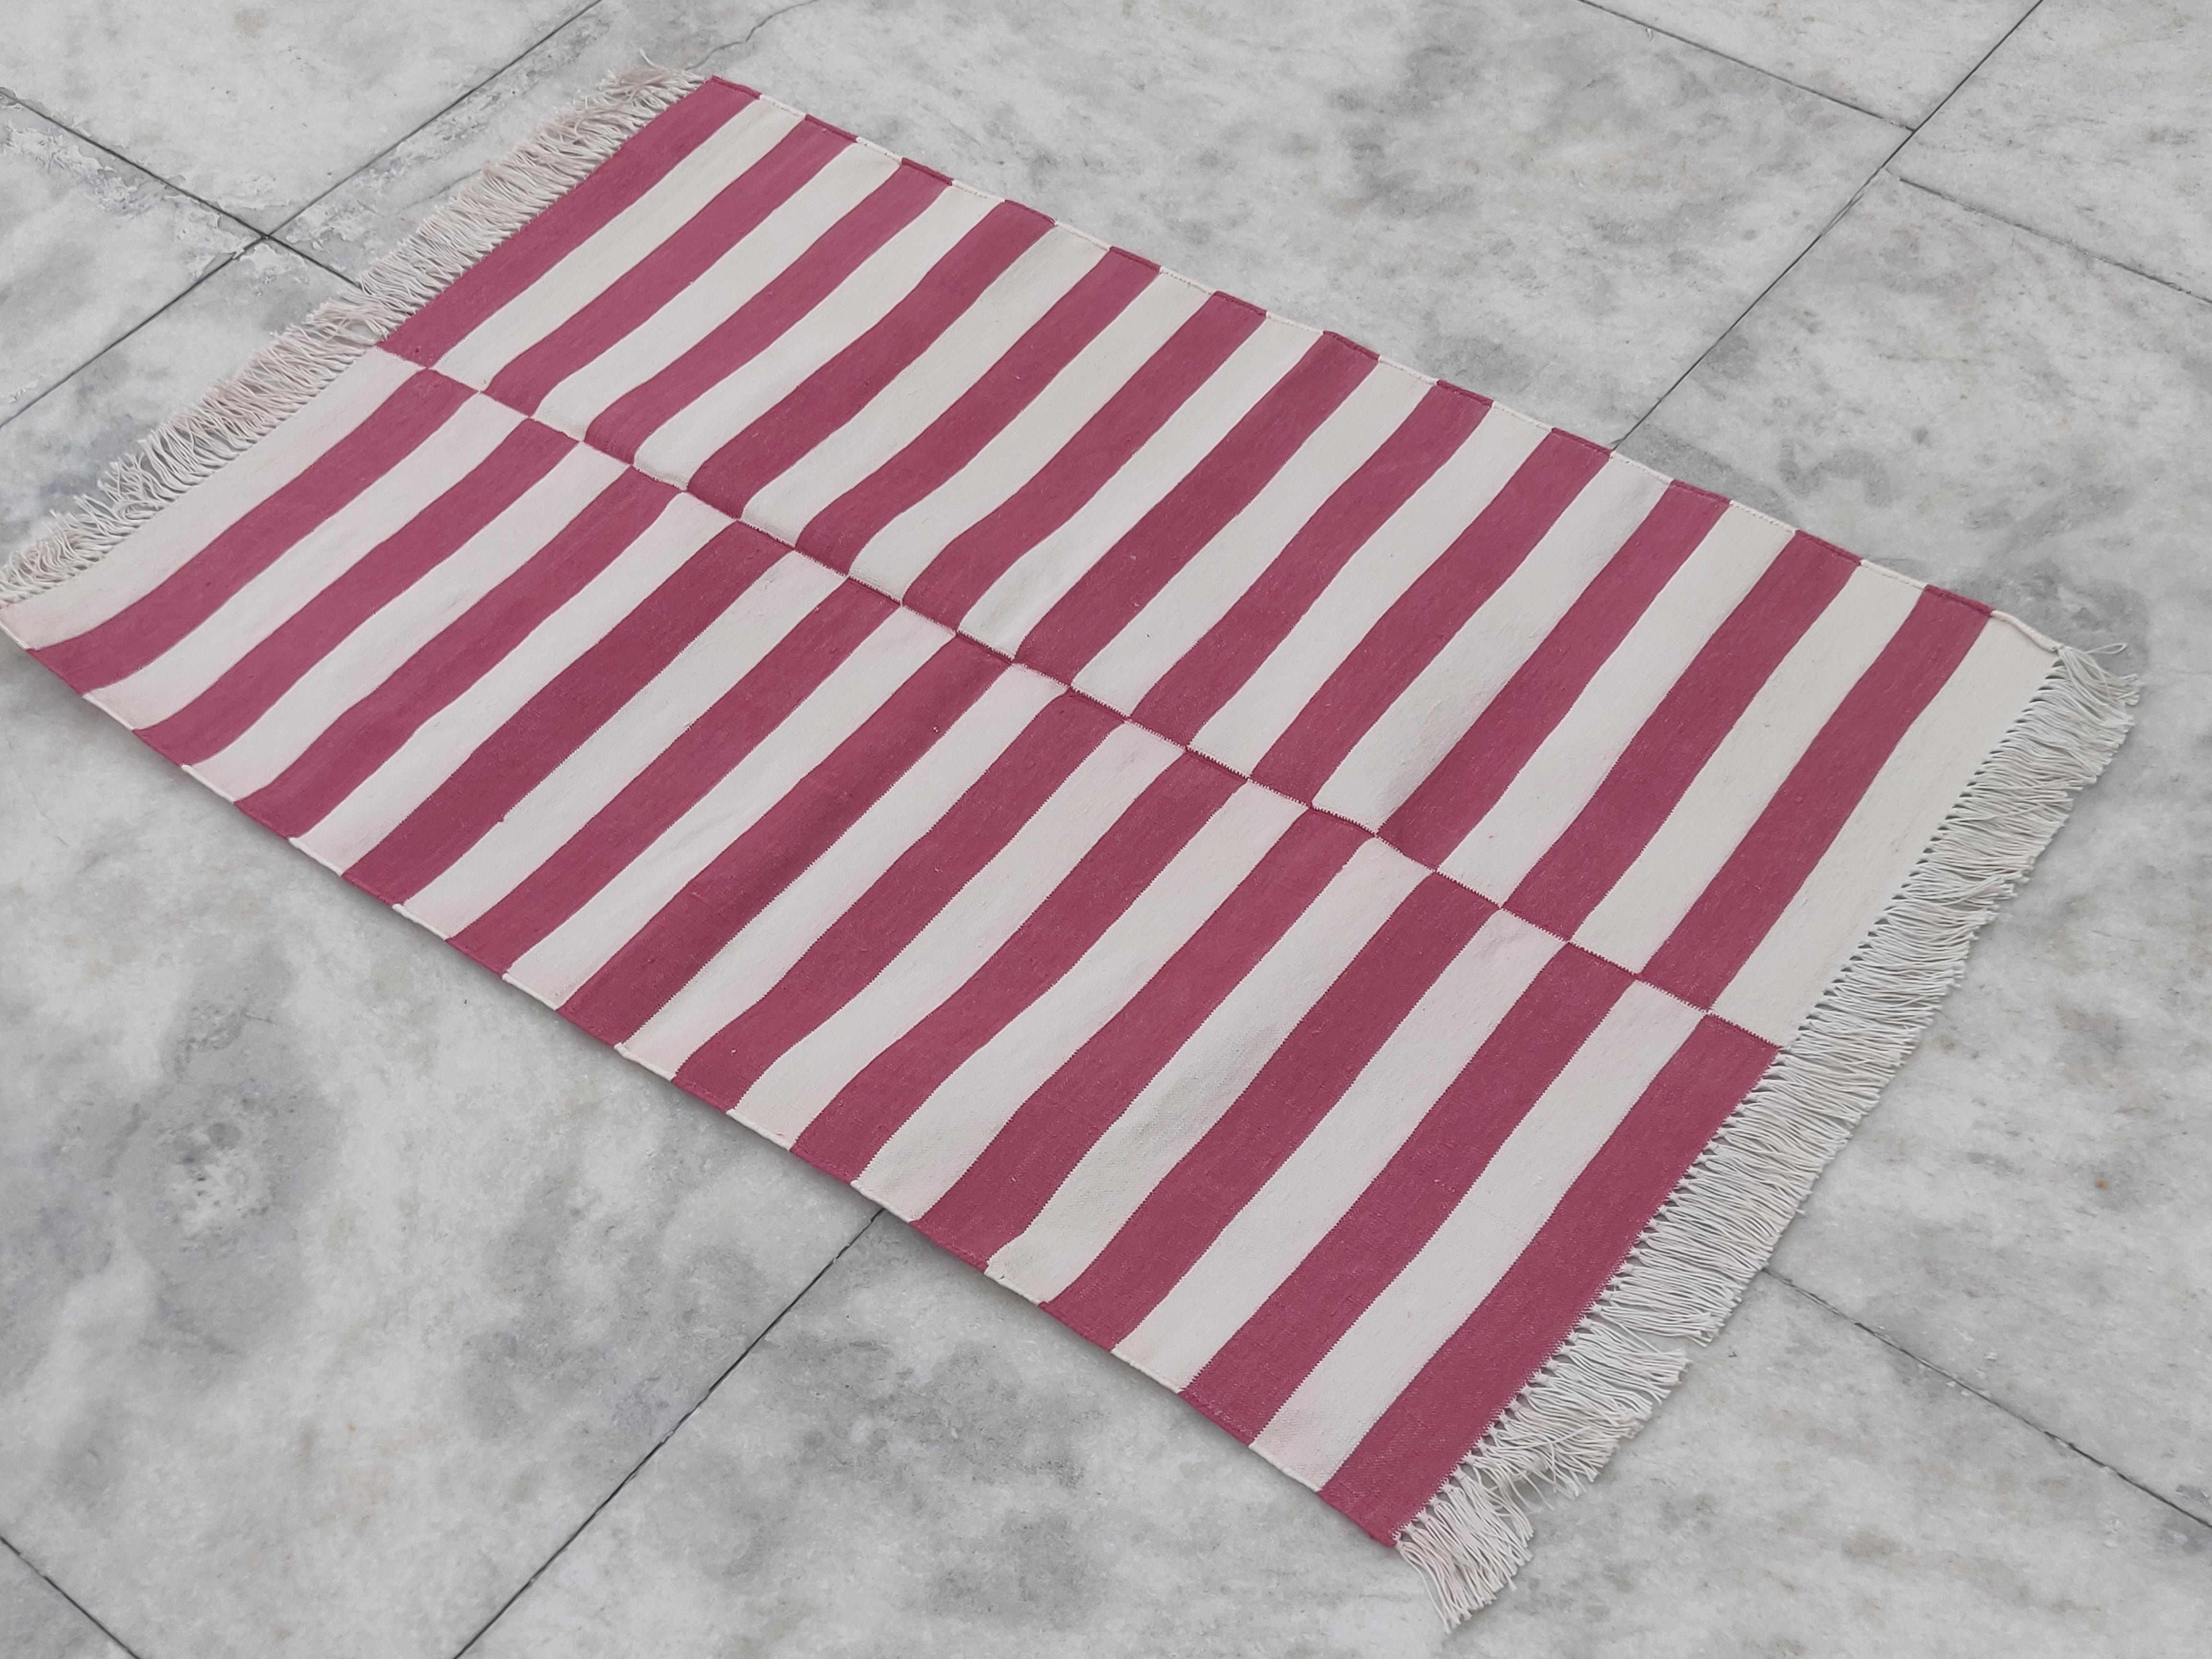 Cotton Vegetable Dyed  Pink And White Striped Indian Dhurrie Rug - 2.5'x4' (75x120cm) 

These special flat-weave dhurries are hand-woven with 15 ply 100% cotton yarn. Due to the special manufacturing techniques used to create our rugs, the size and